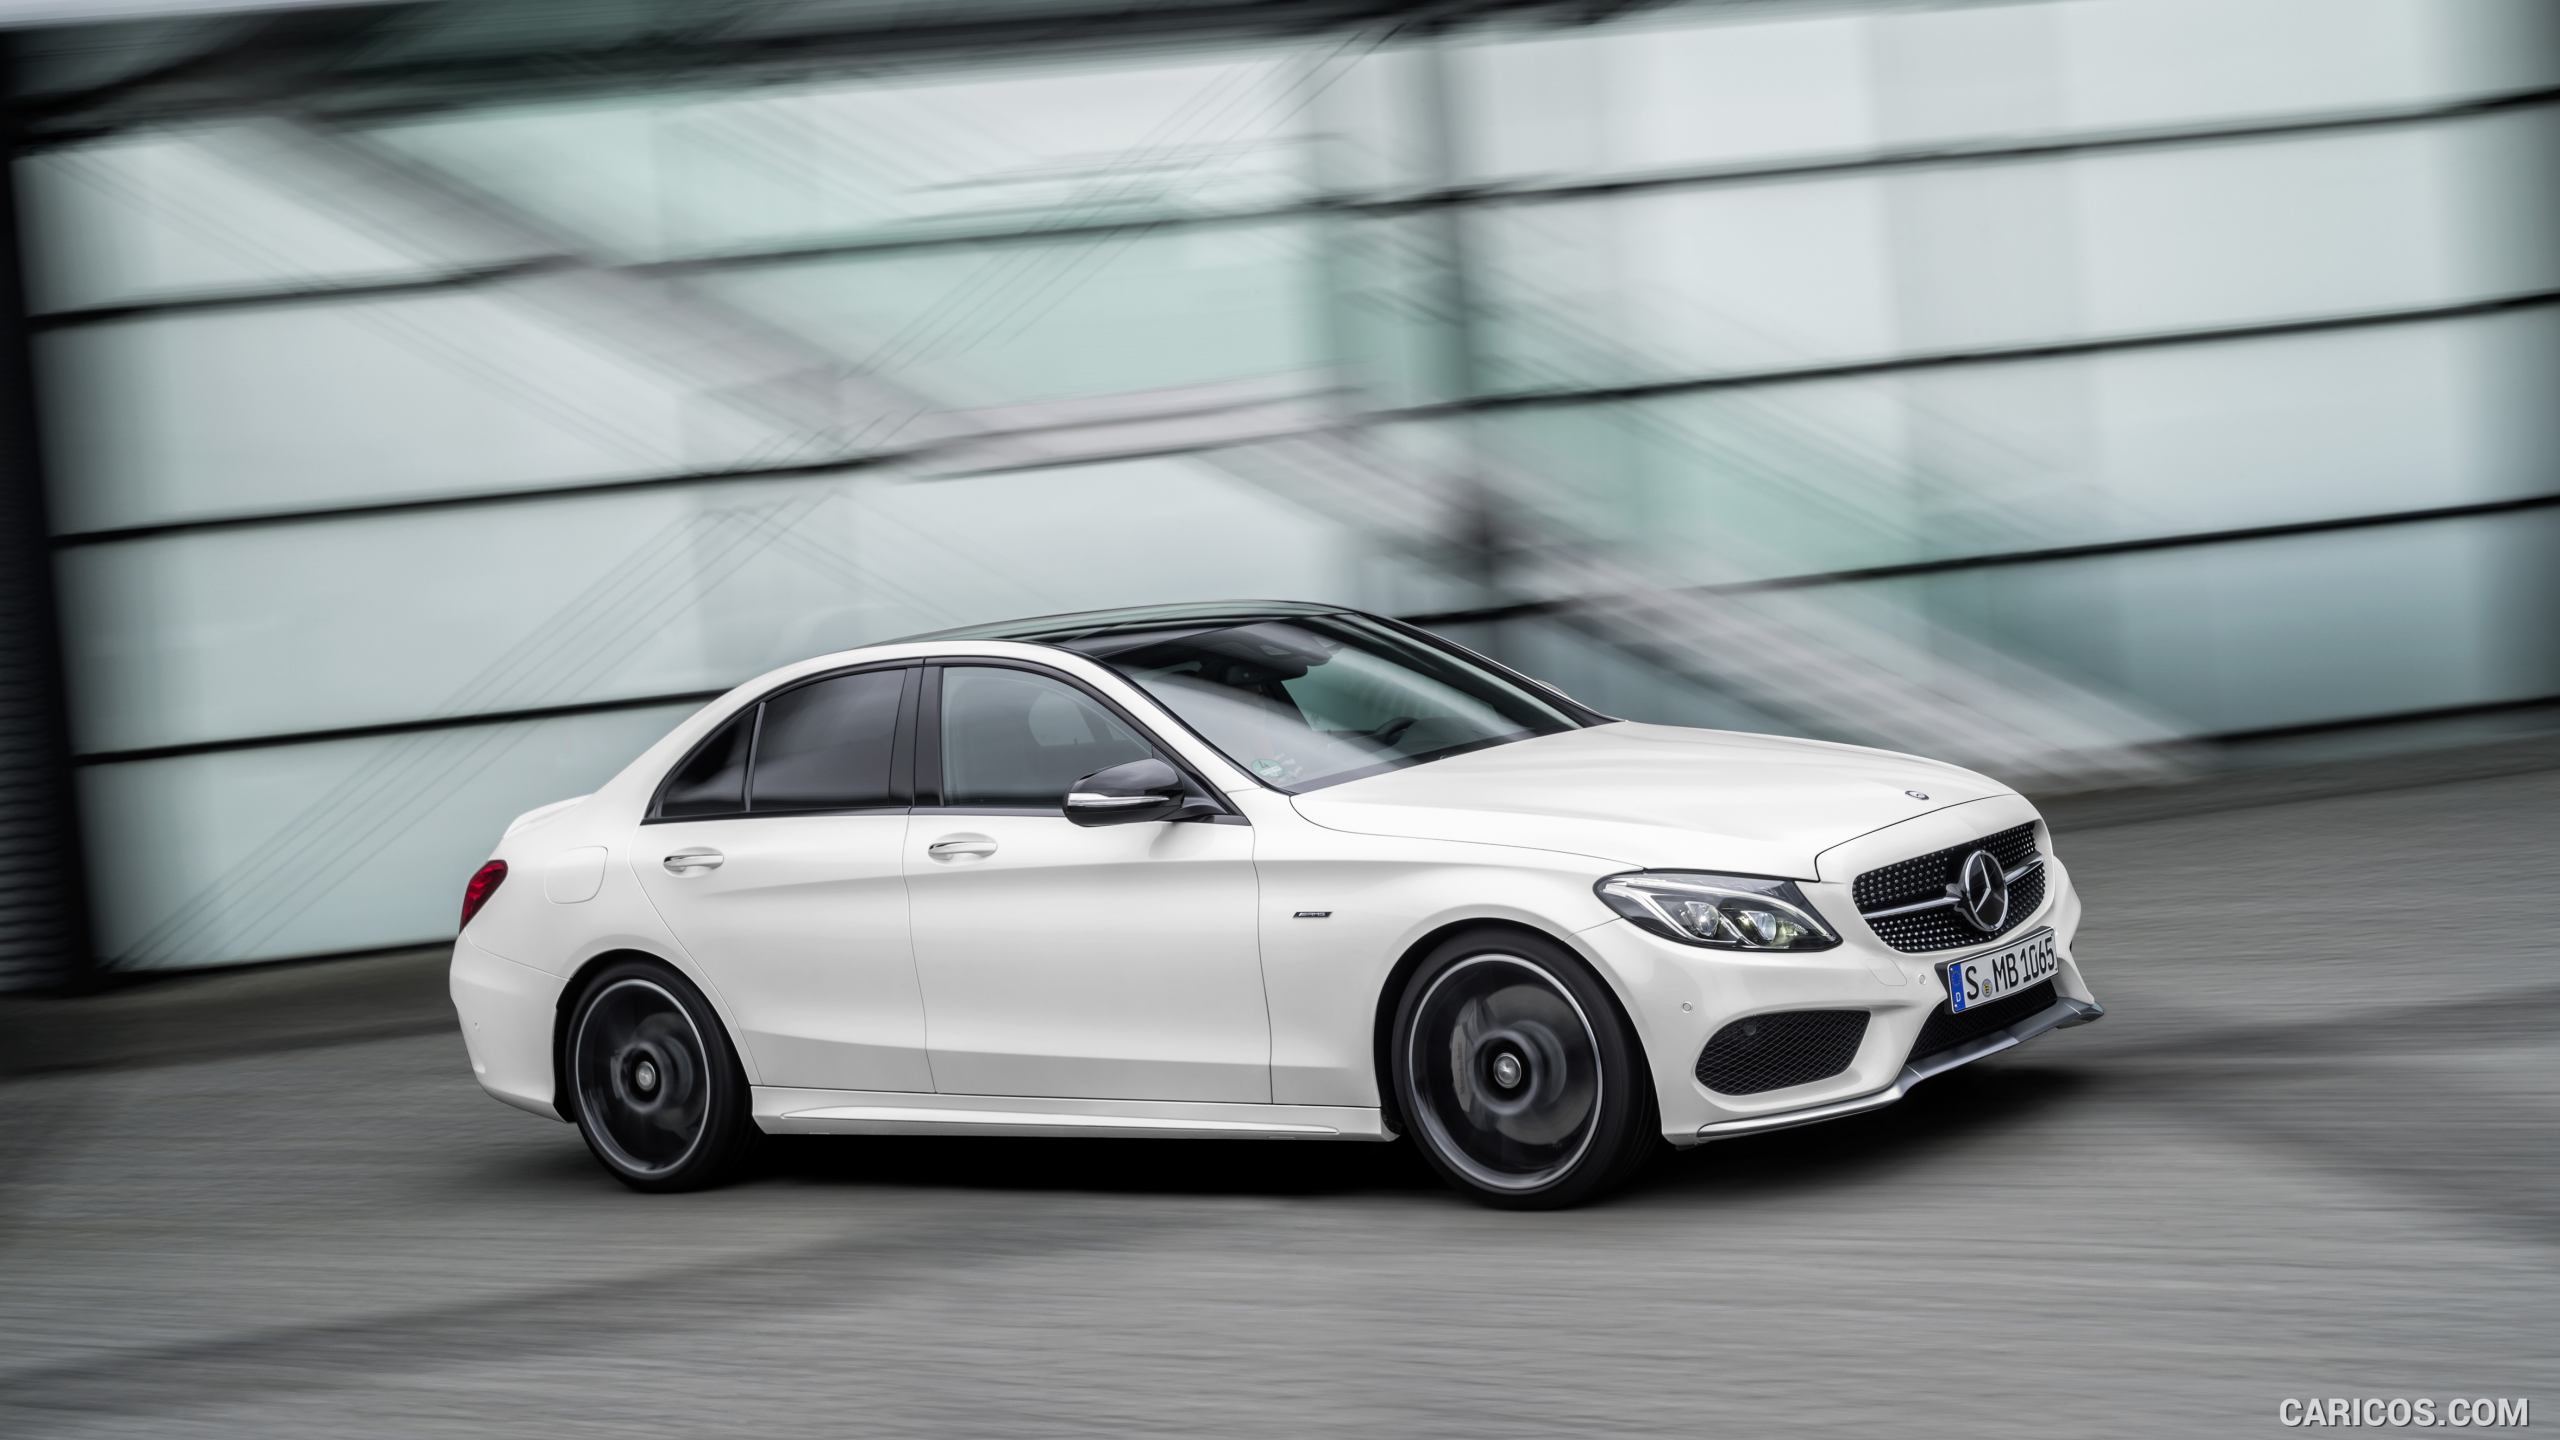 2016 Mercedes-Benz C450 AMG 4MATIC (Diamond White) - Side, #9 of 122